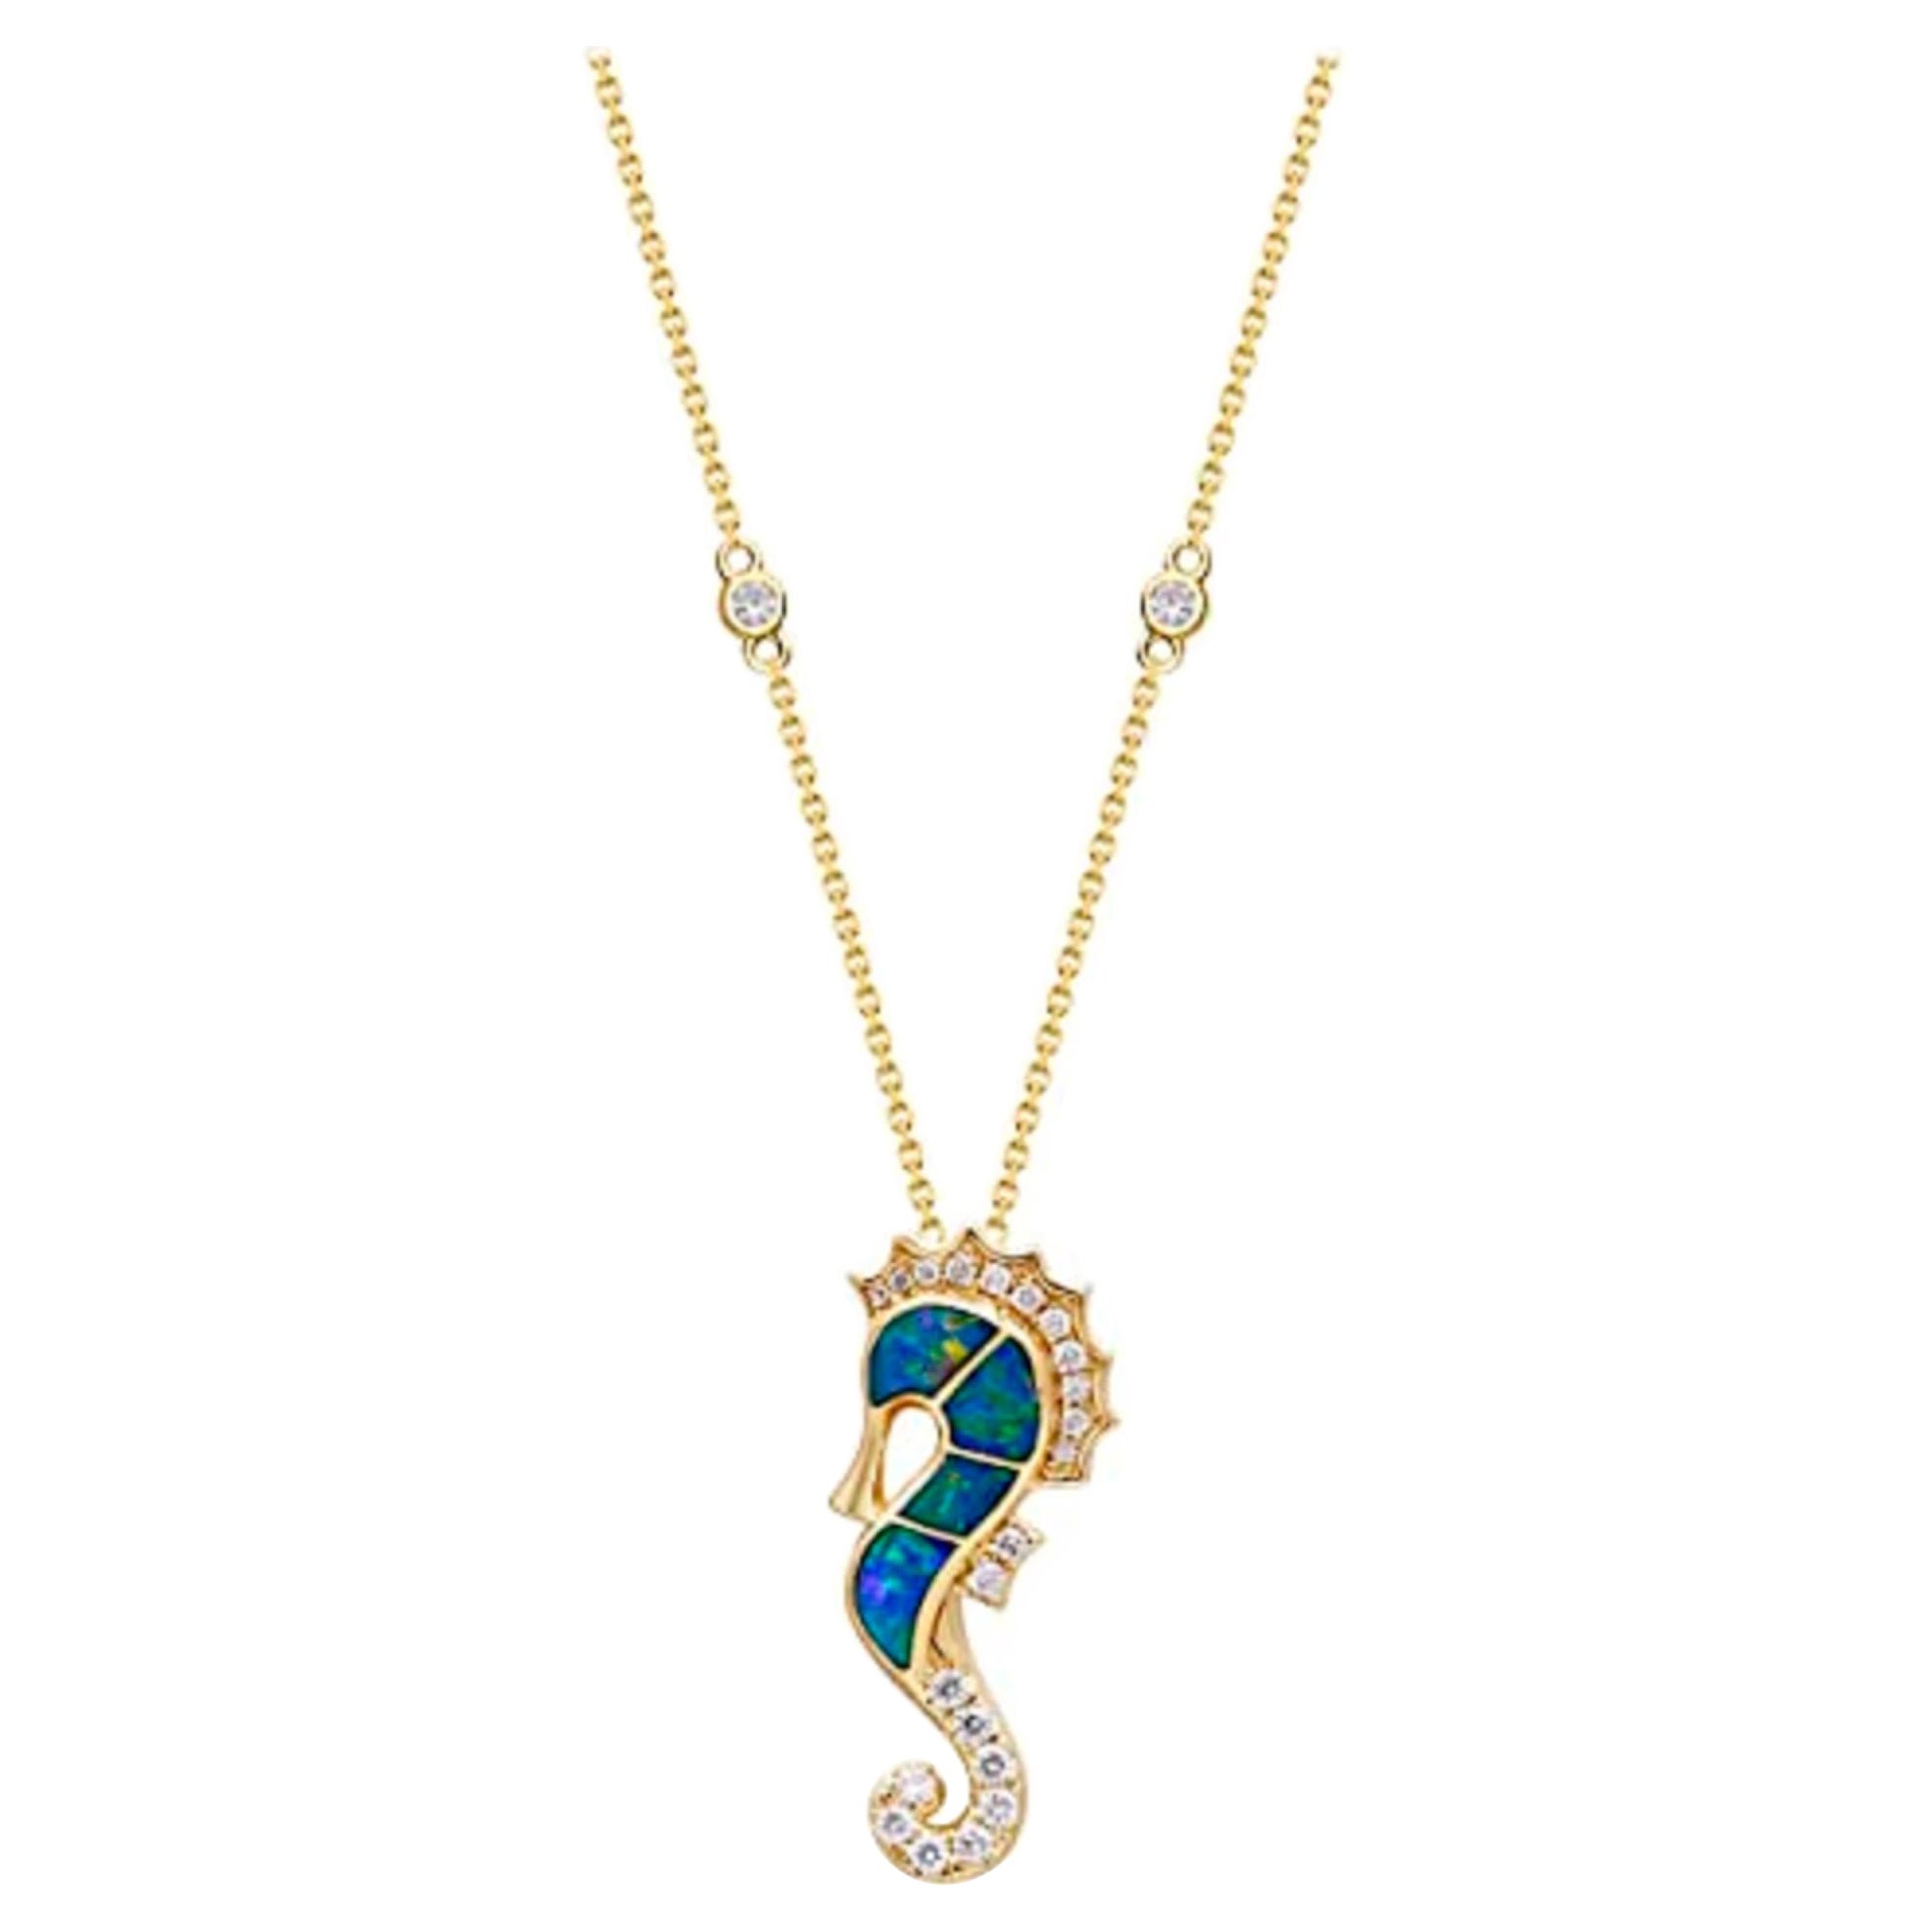 Gin & Grace 14K Yellow Gold Inlay Opal Fancy Pendant with Diamonds for women